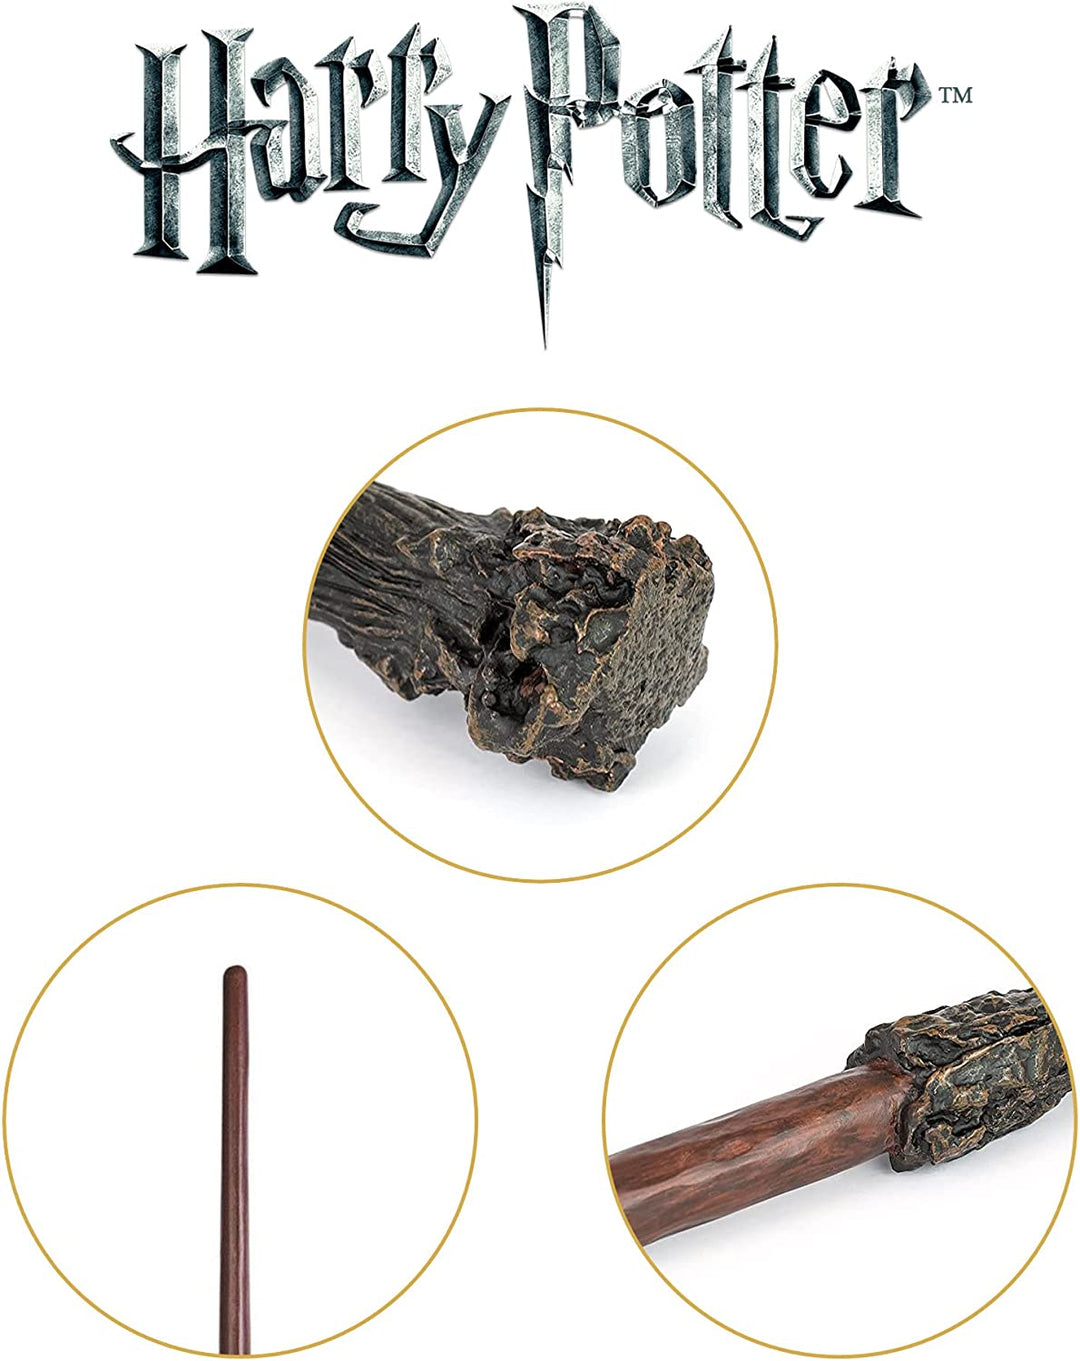 Official Harry Potter Wand in Ollivanders Box